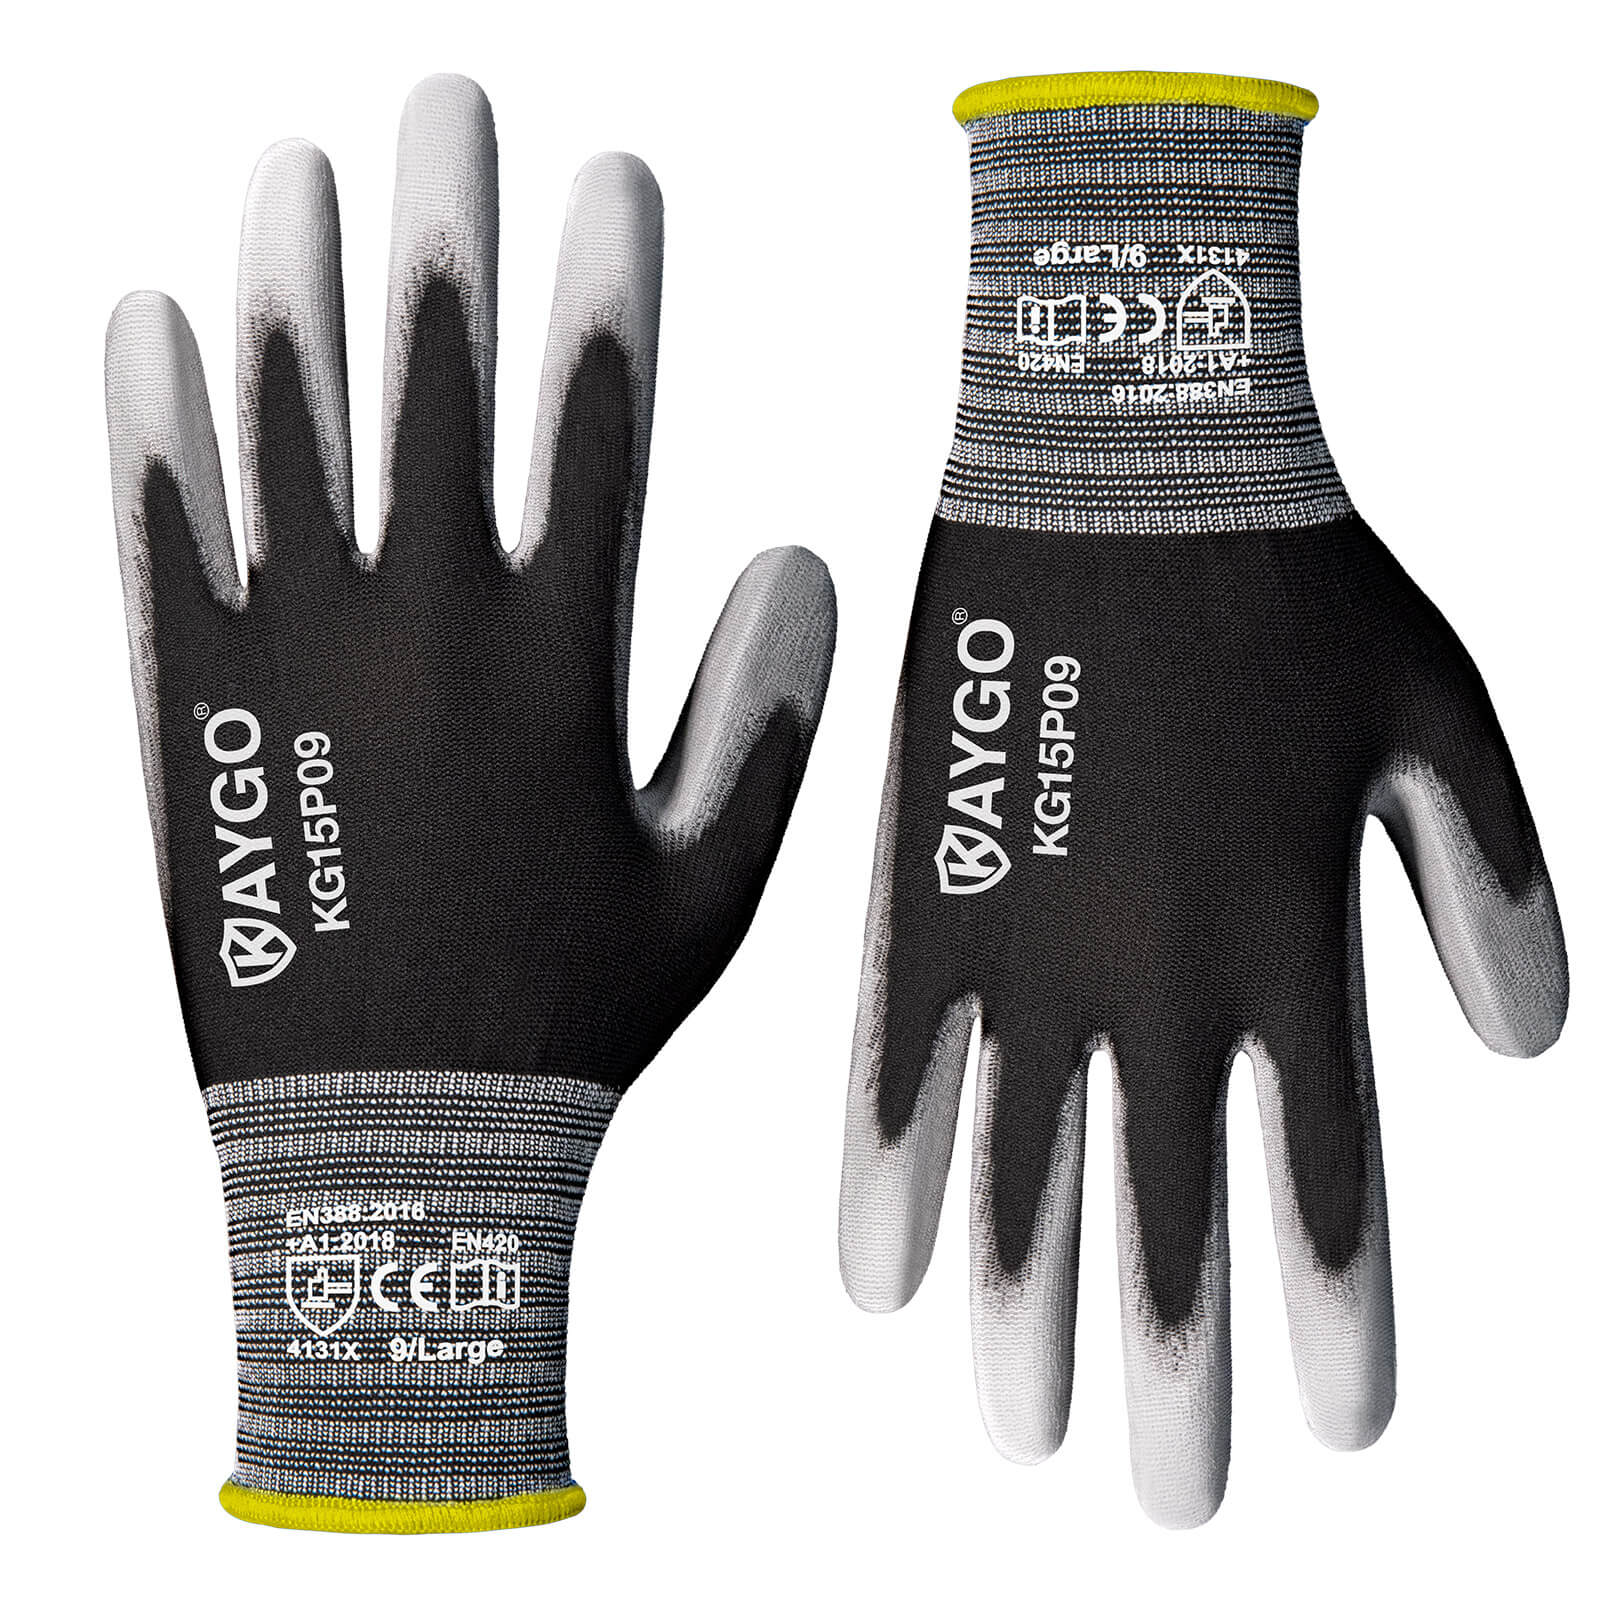 Seamless Knit Nylon Work Gloves with Polyurethane Coated on Palm and Fingers